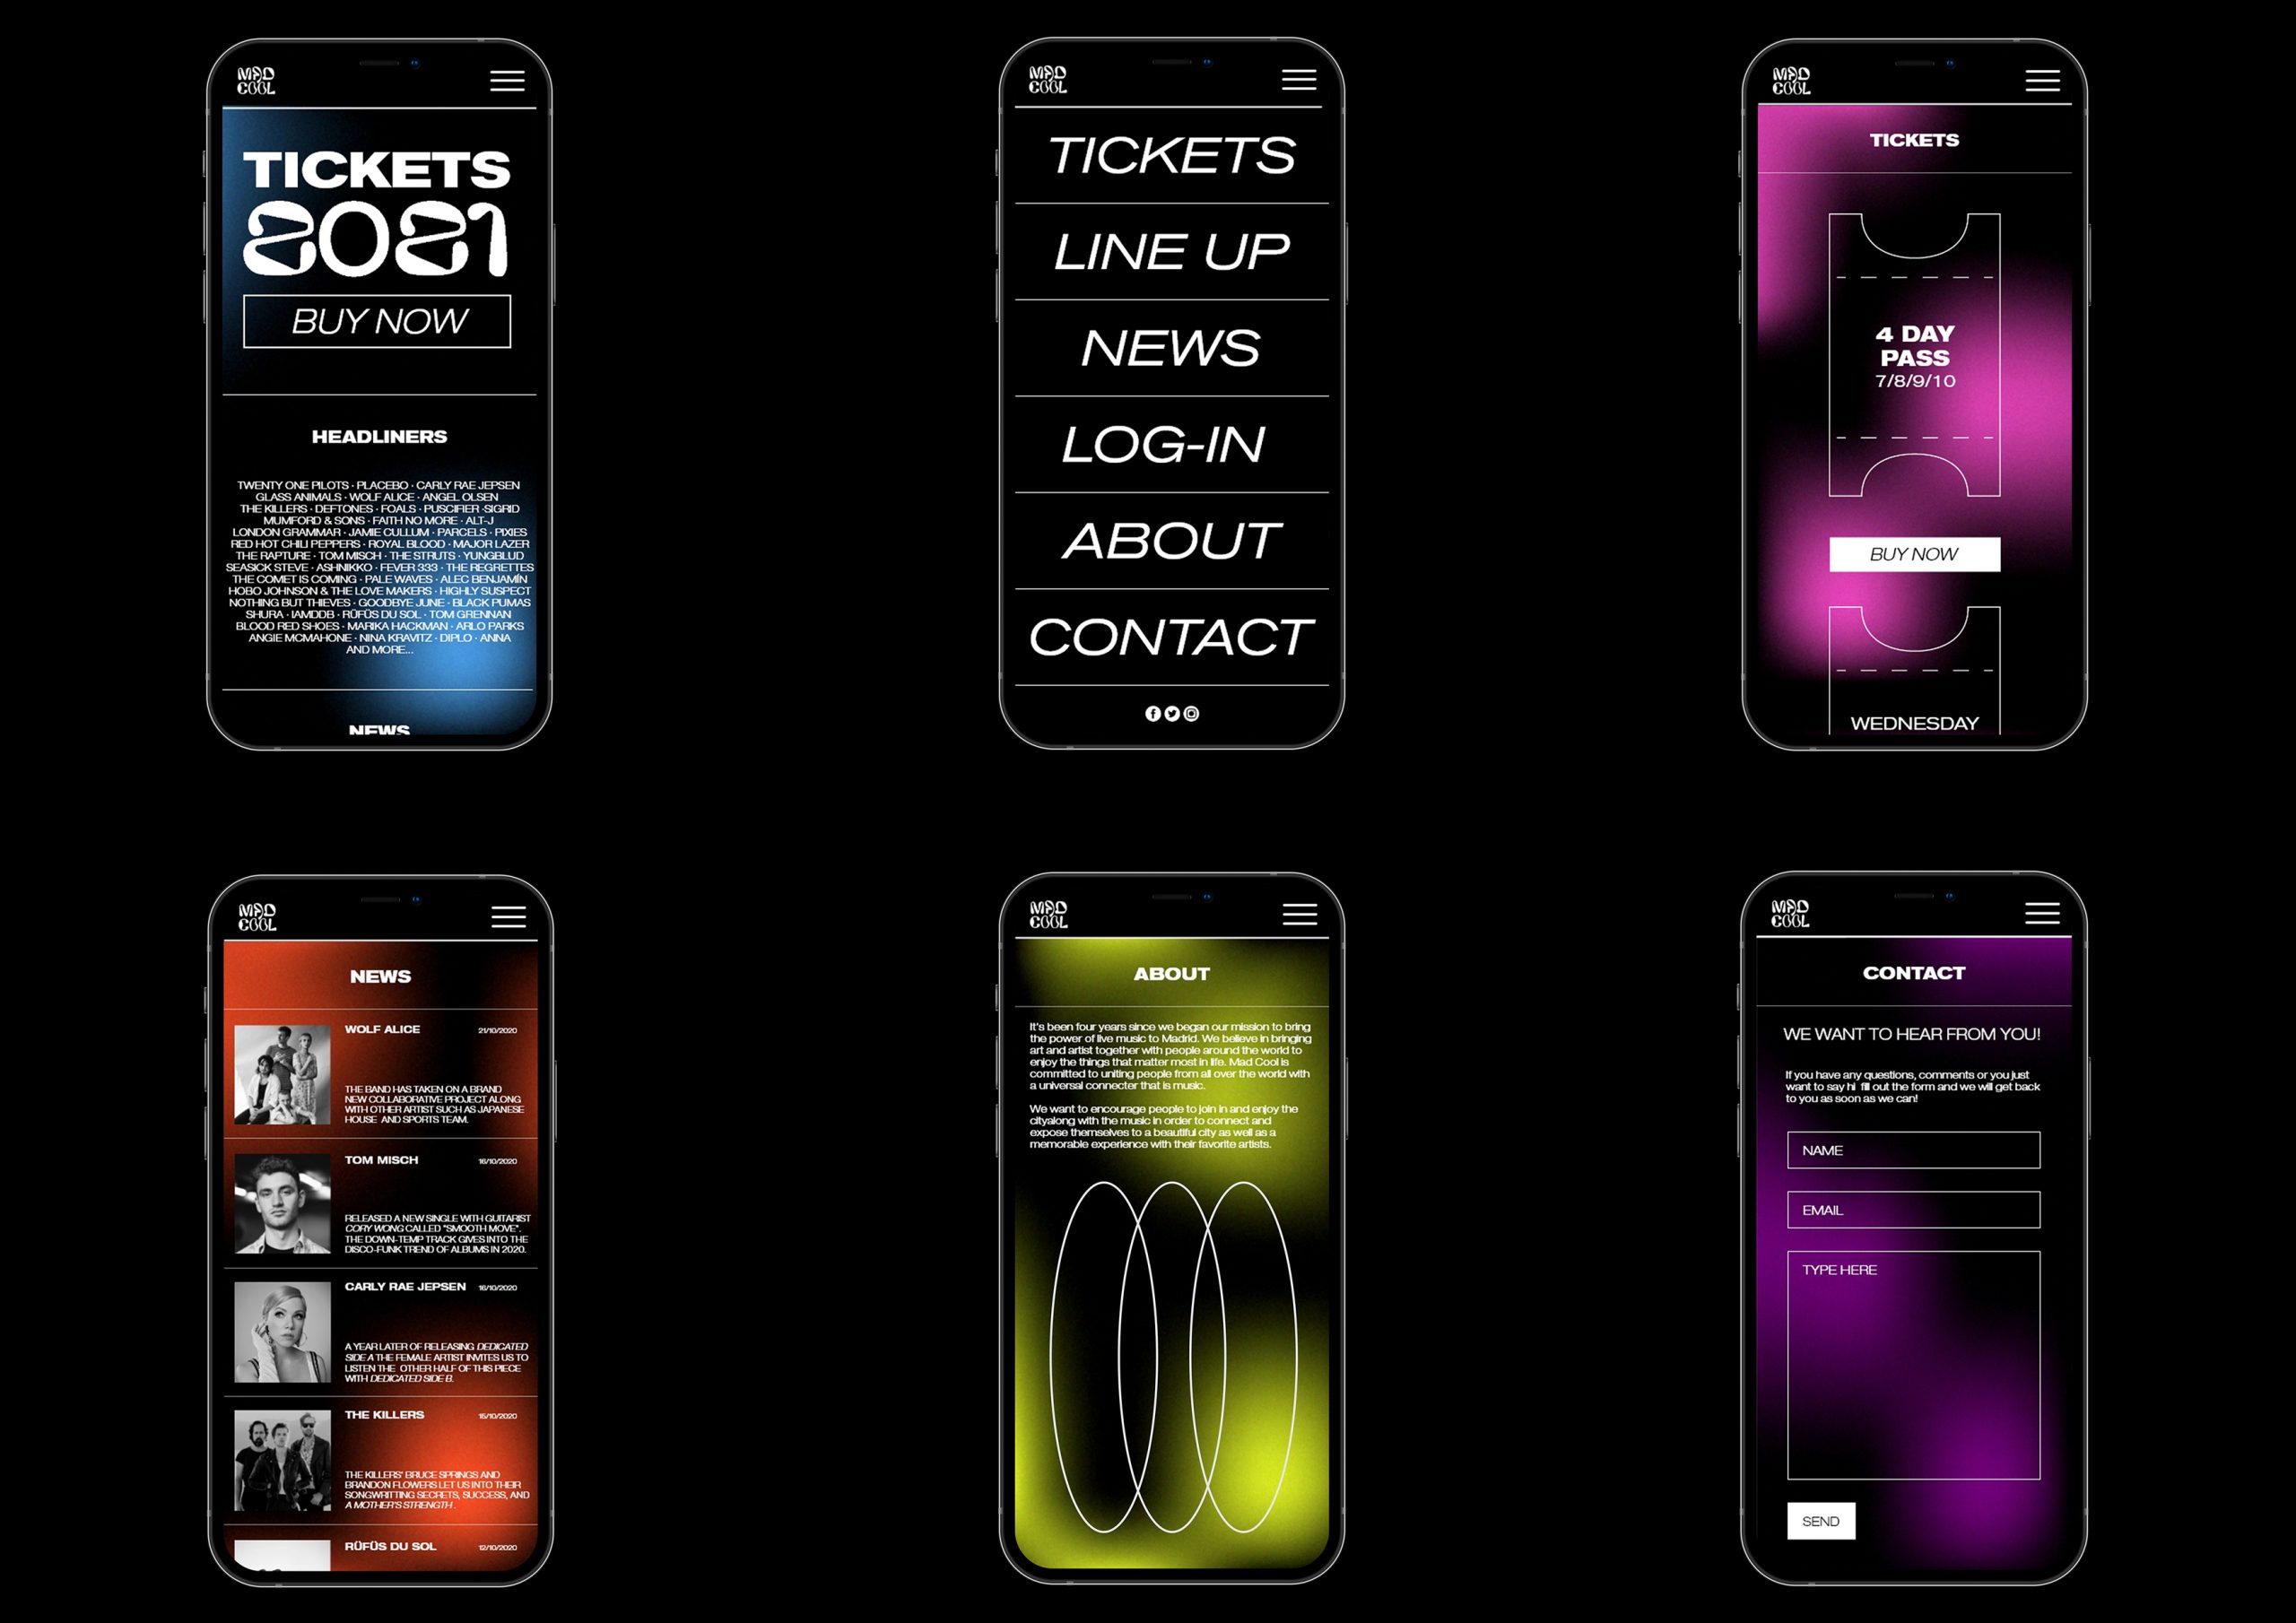 What would aUX and UI for Mad cool App look like for the new rebranding of the festivals brand identity